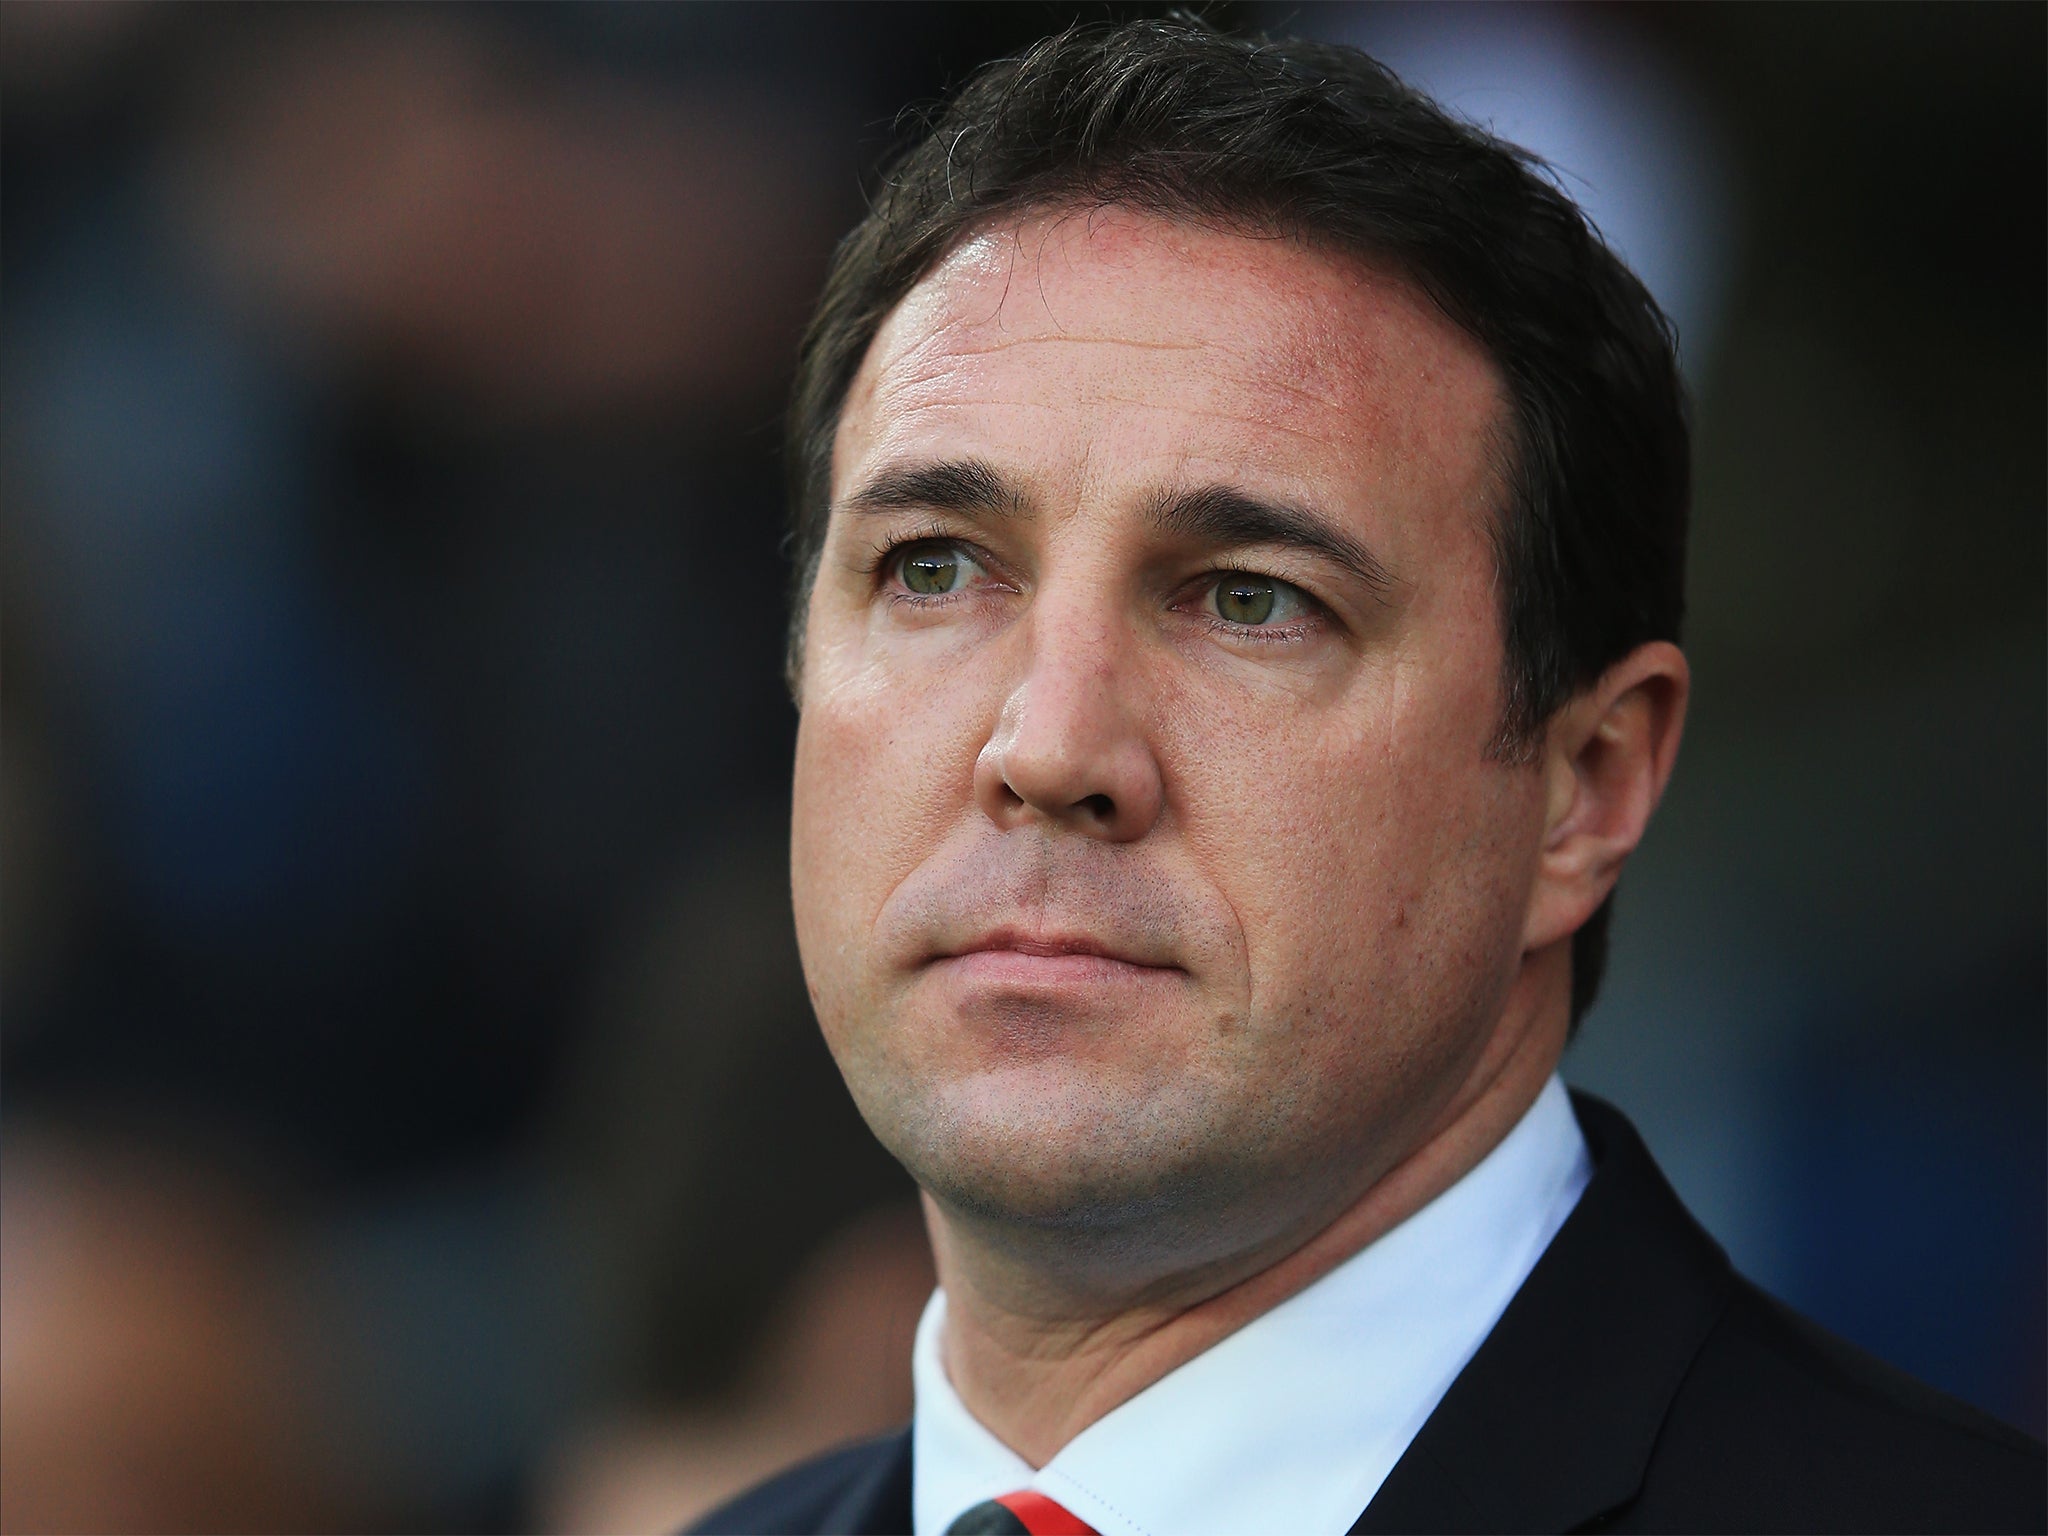 Malky Mackay has been ruled out of the vacant manger's role at Crystal Palace